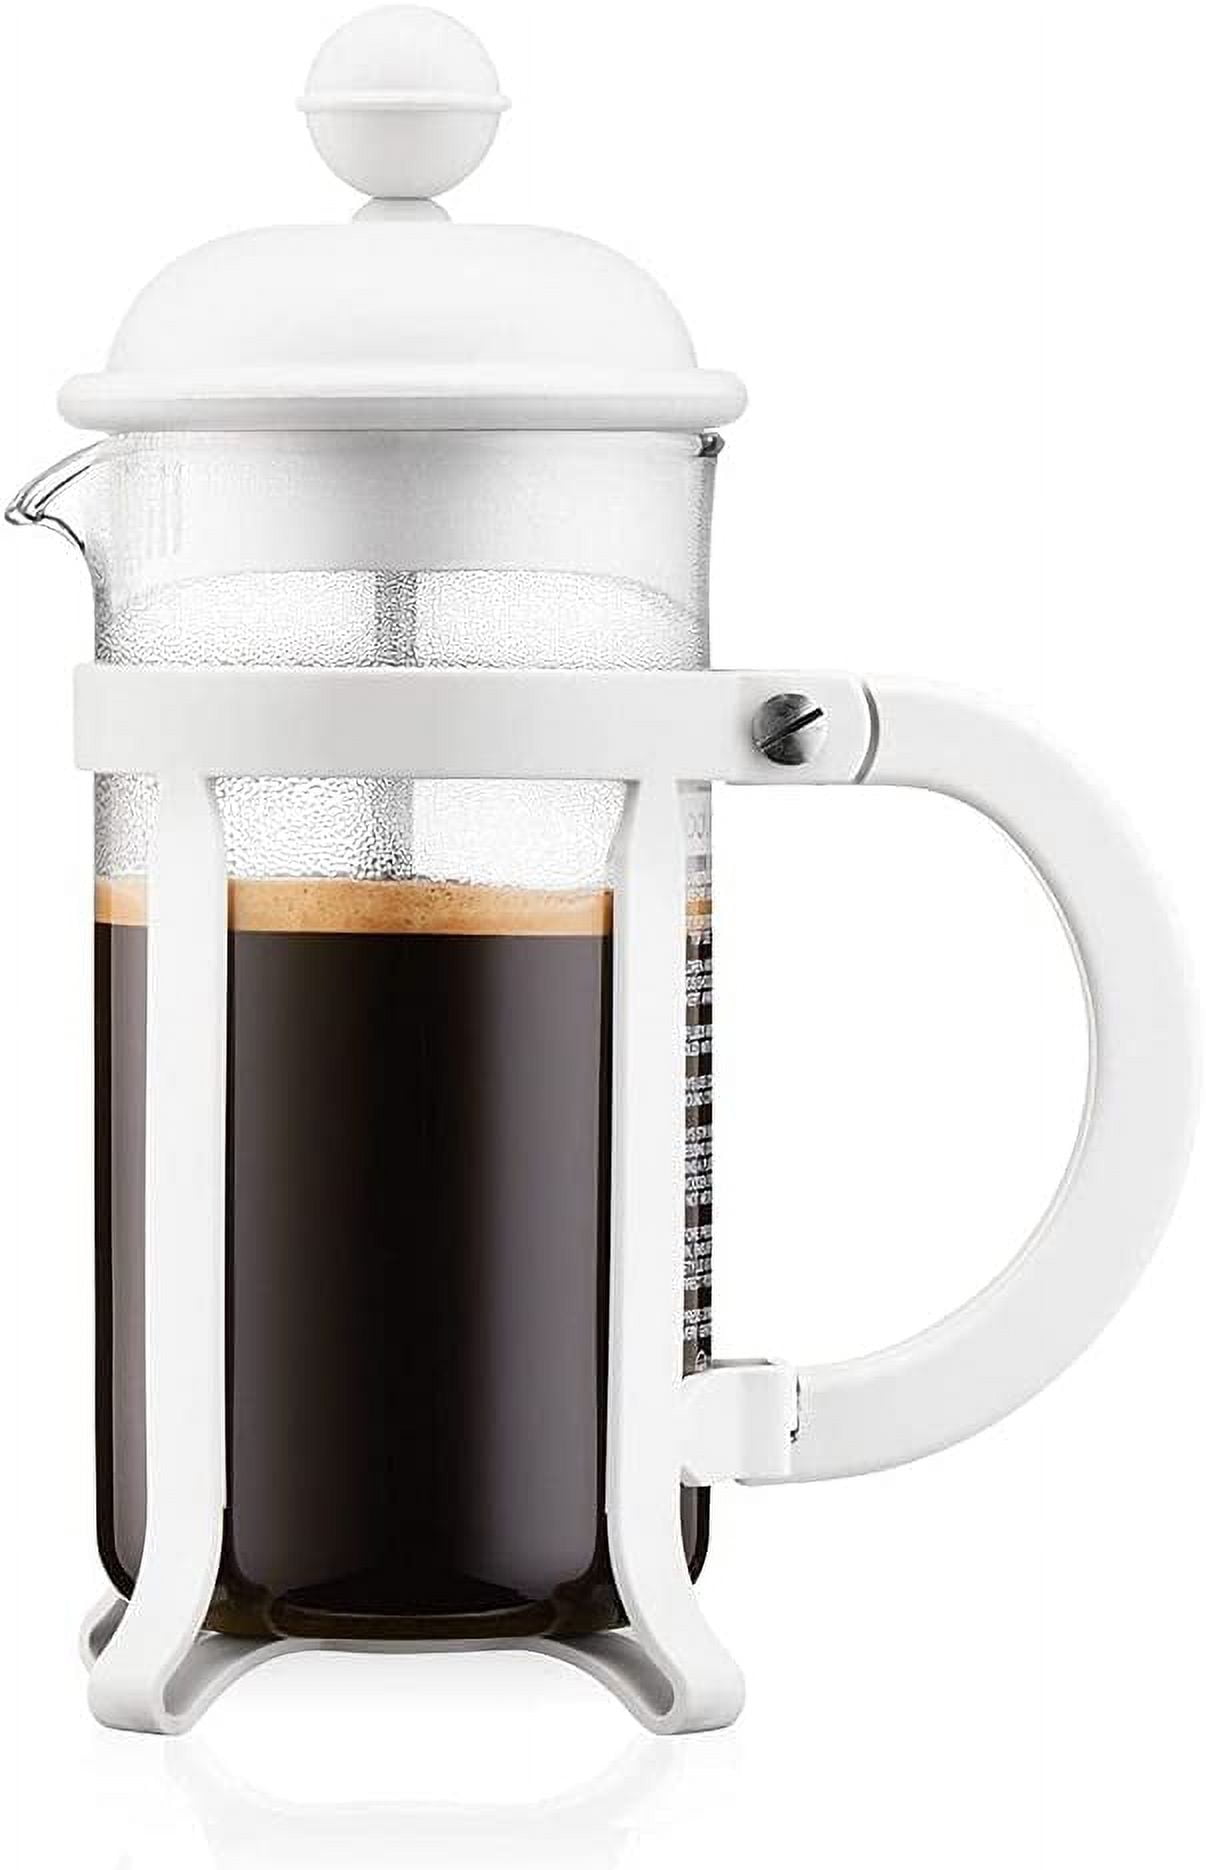 Bodum JAVA French press coffee maker, 8 cup, 1.0 l, 34 oz, 3 cup – The  Gilded Carriage